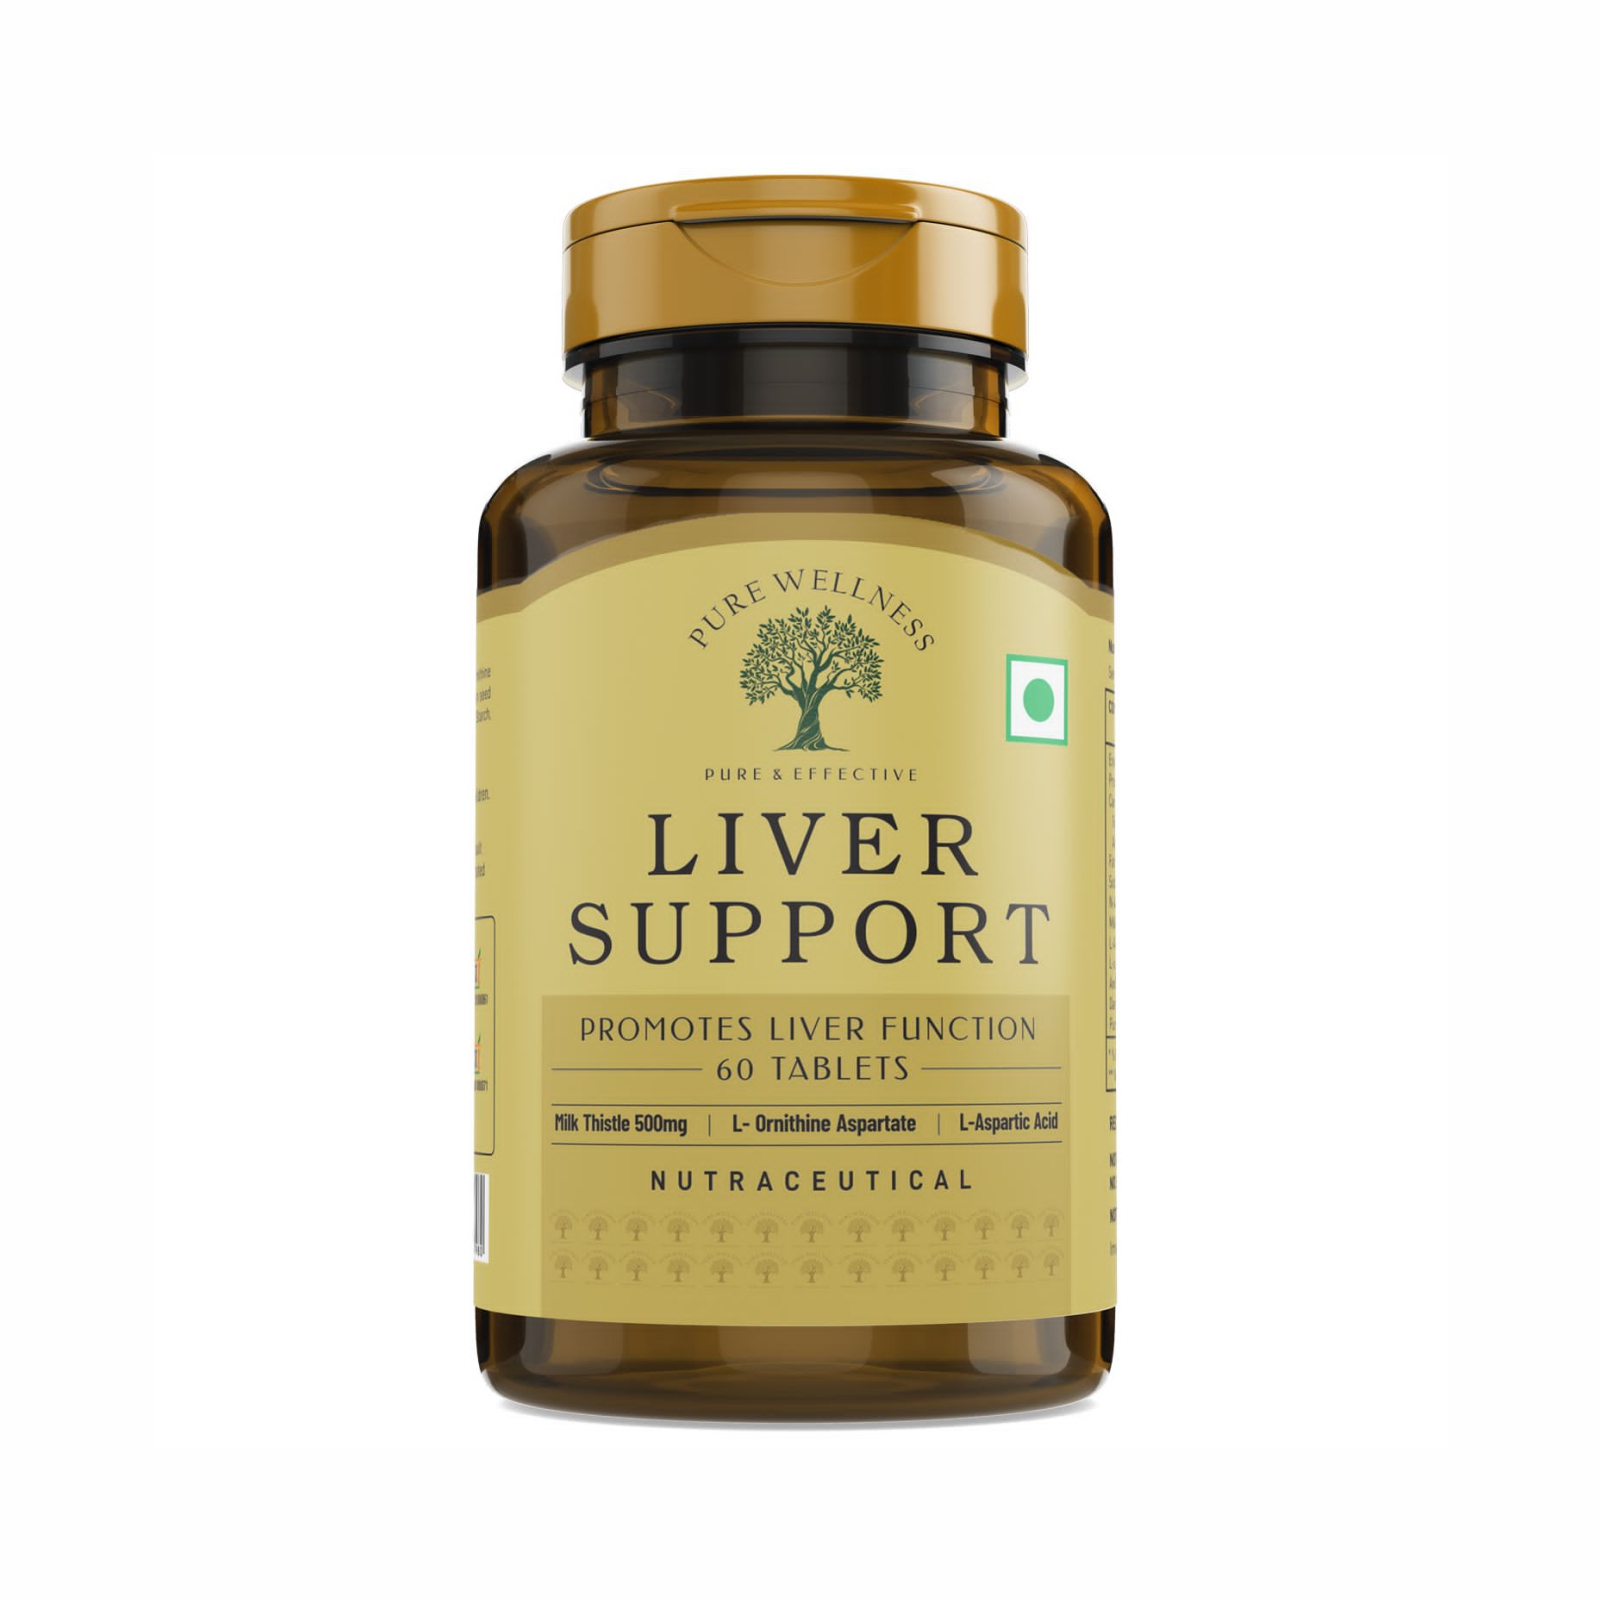 Liver support for overall wellbeing